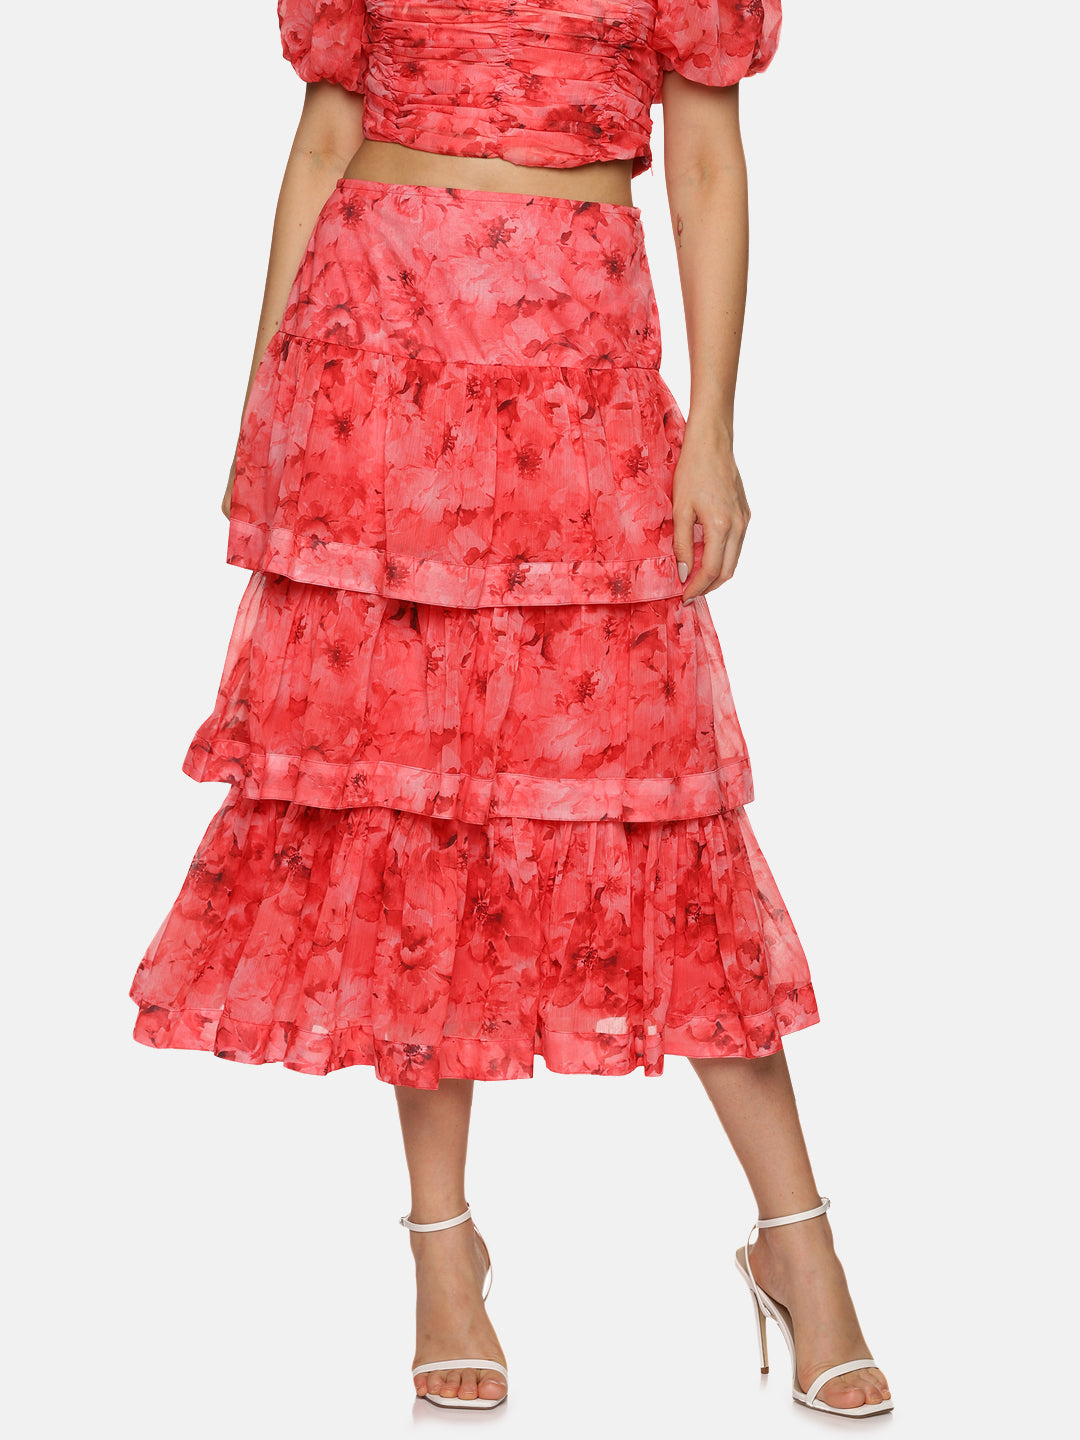 Buy Corset Floral Coral Ruching Dress Online At best Price